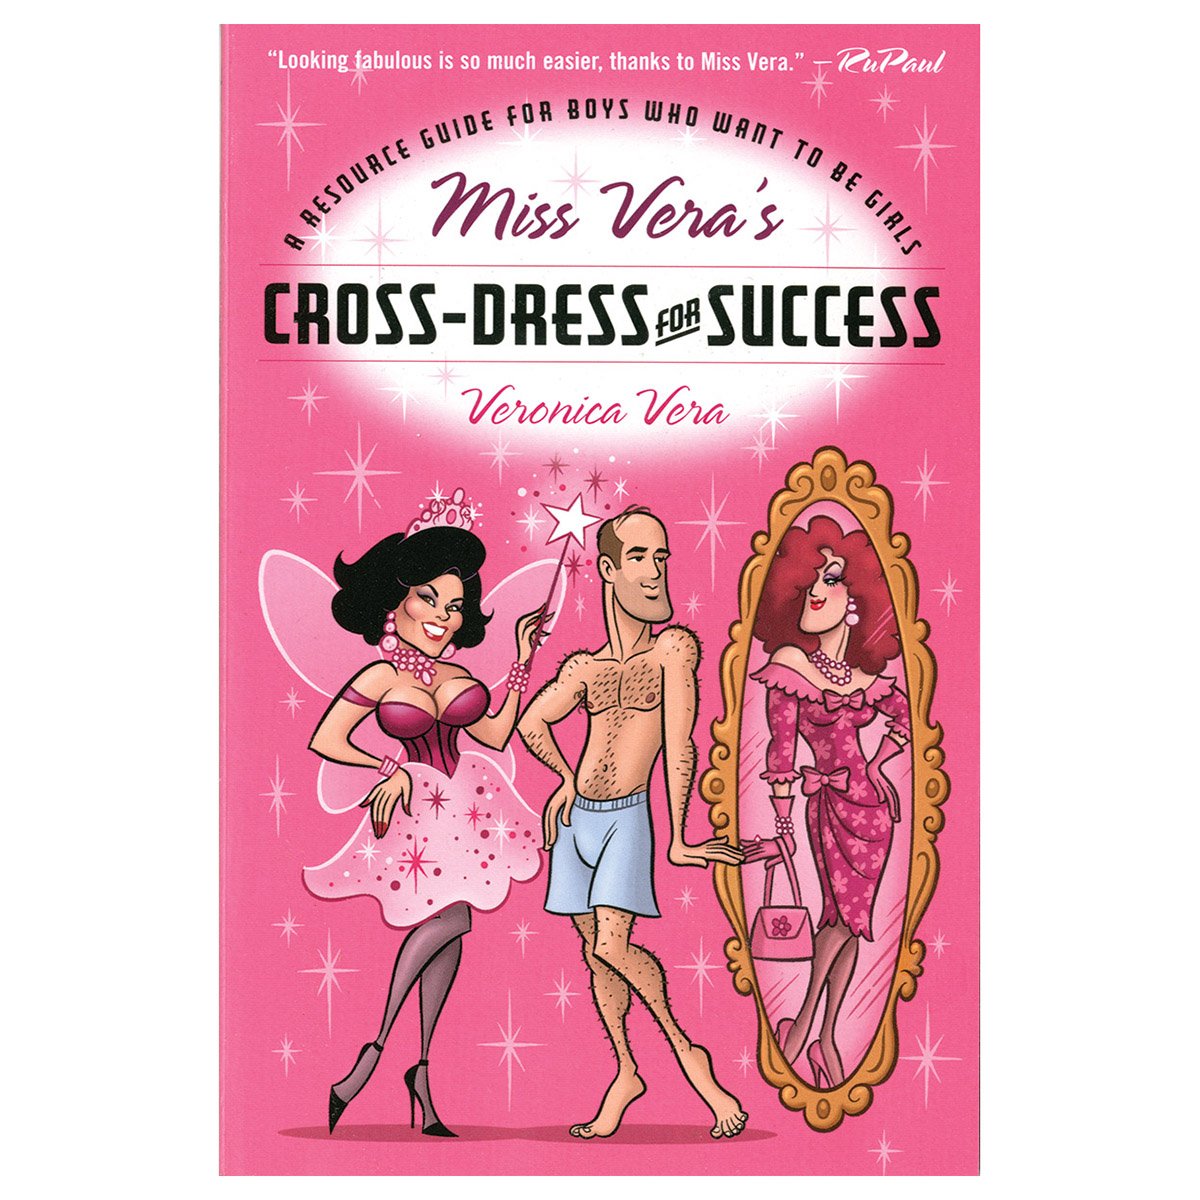 Miss Vera's Cross-Dress for Success - A Resource Guide for Boys Who Want to Be Girls - Villard Books